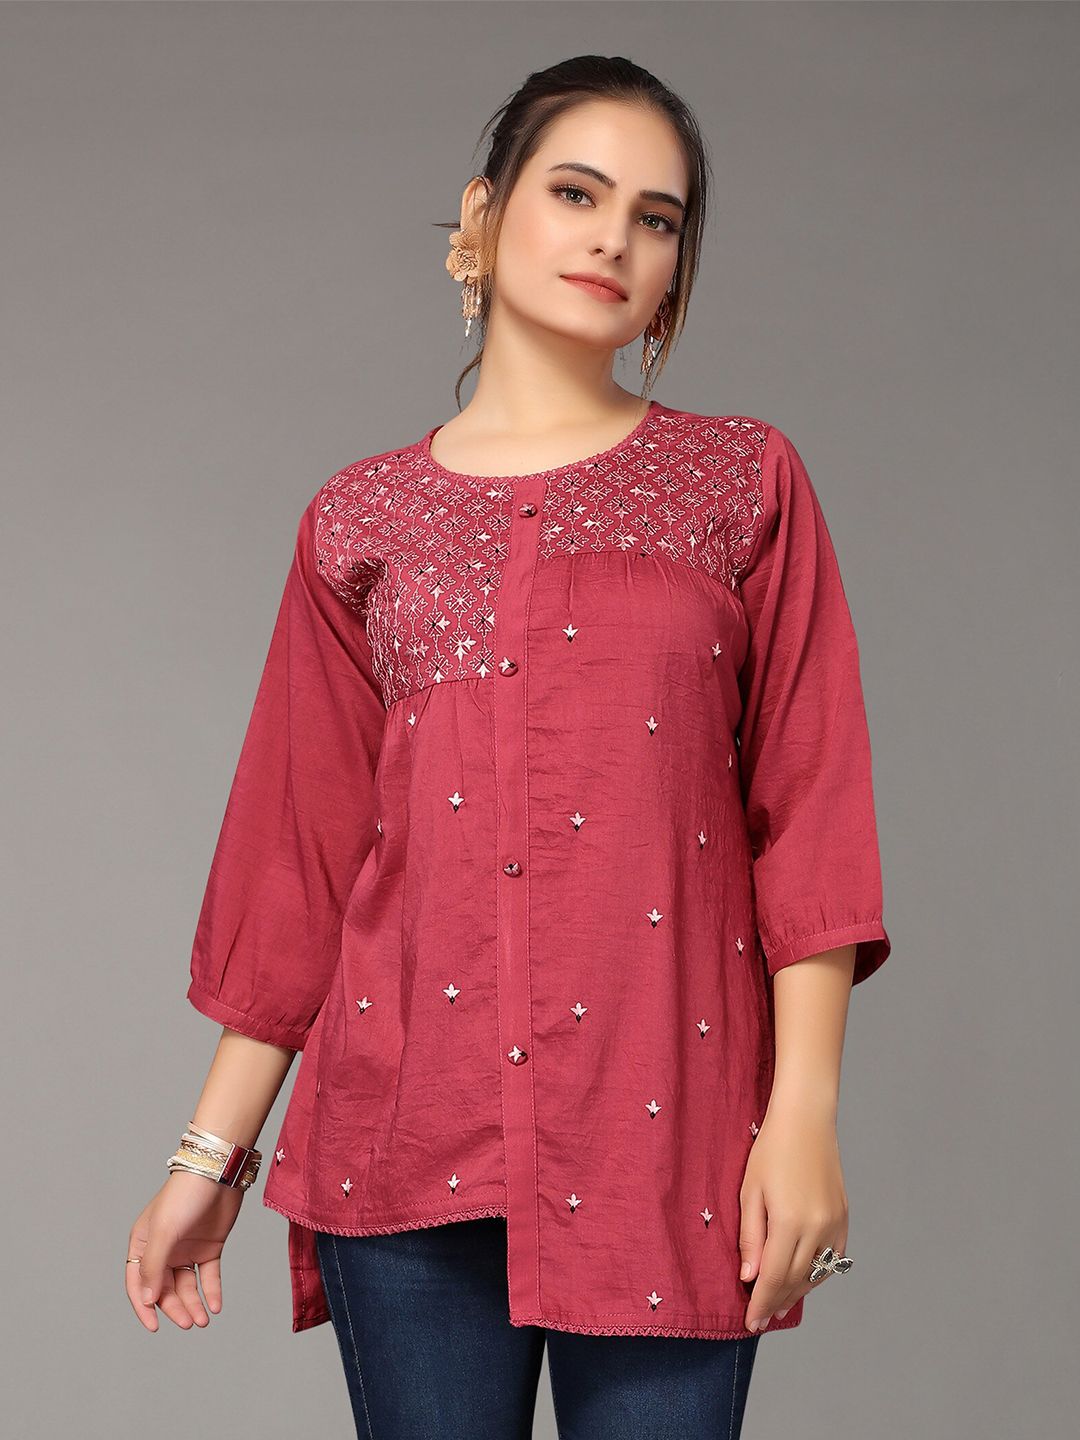 Nimayaa Women Pink Floral Embellished Embroidered Top Price in India